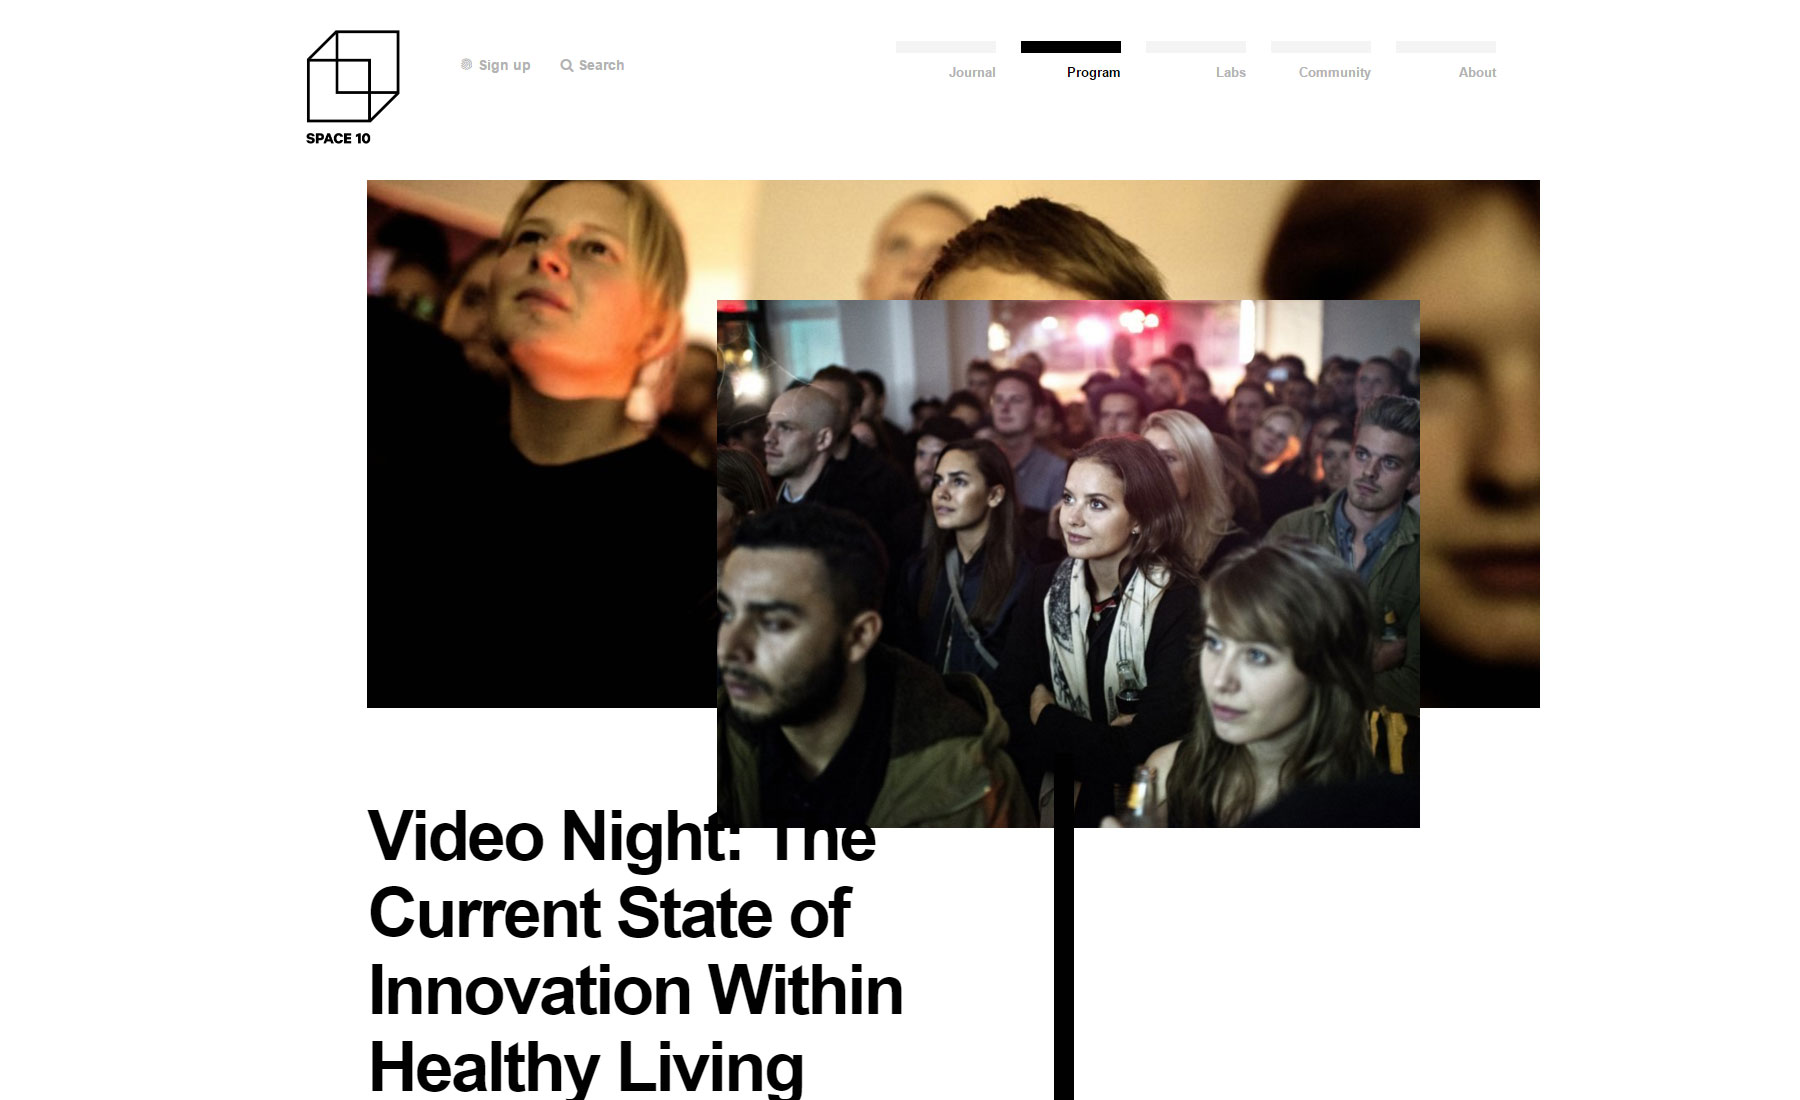 Space10 - Website of the Day